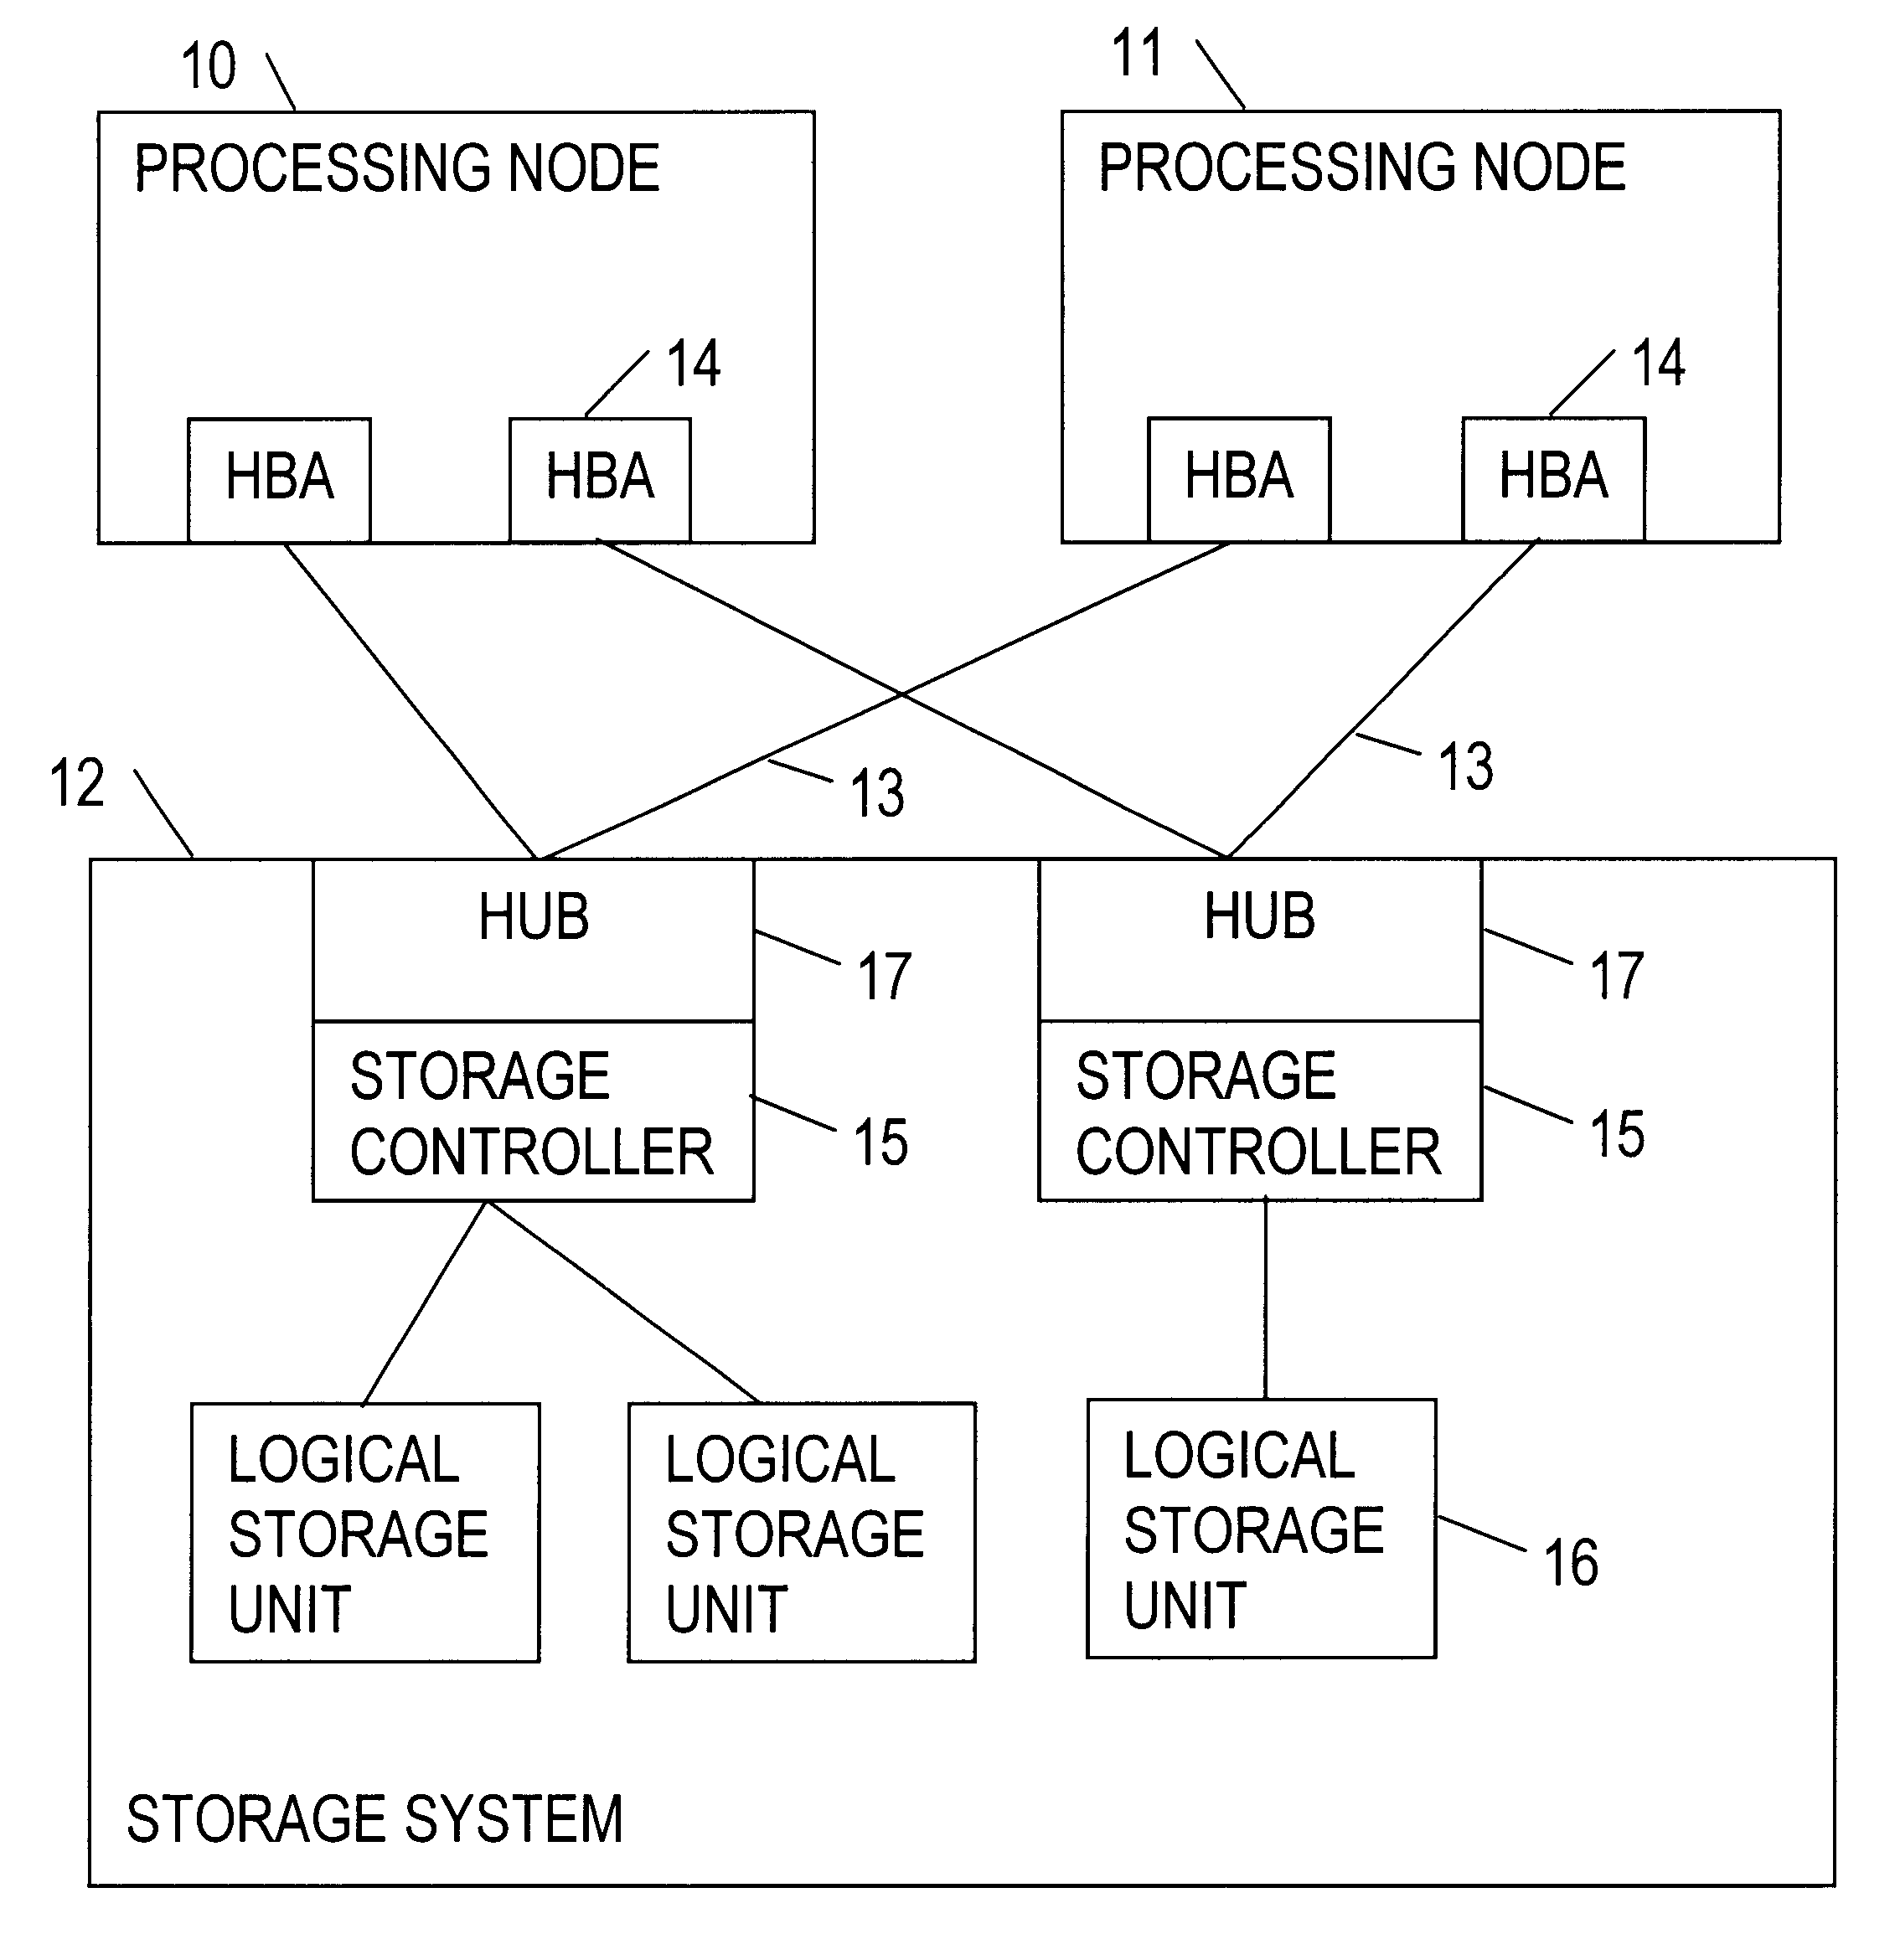 Masking logical unit numbers in a shared data storage system